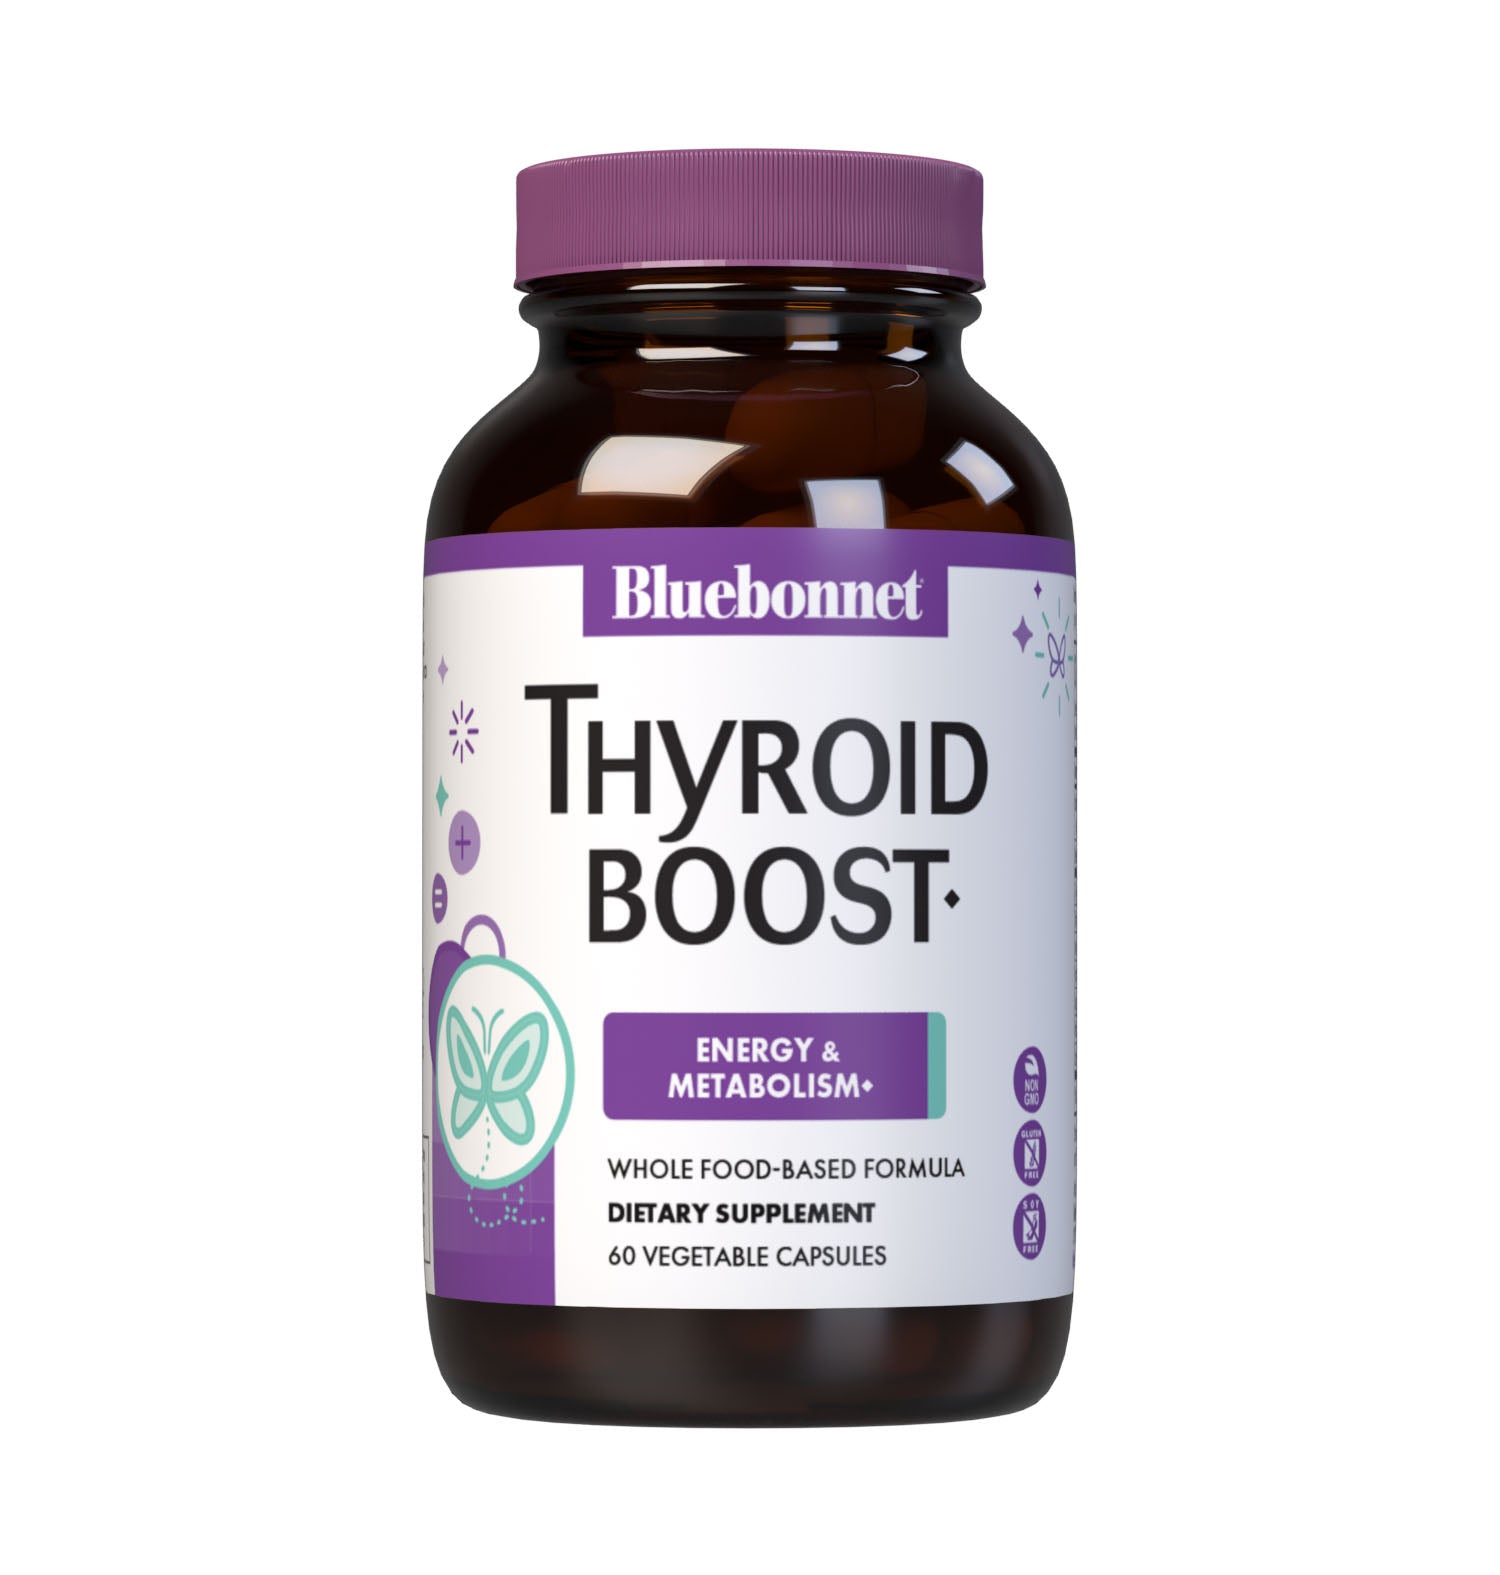 Bluebonnet’s Targeted Choice Thyroid Boost 60 Vegetable Capsules are specially formulated with unique, sustainably harvested or wildcrafted botanical extracts, free-form L-tyrosine, as well as iodine from a proprietary blend of glandular powder, potassium iodide and brown seaweeds to help maintain healthy thyroid hormone levels that are within the normal range. #size_60 count